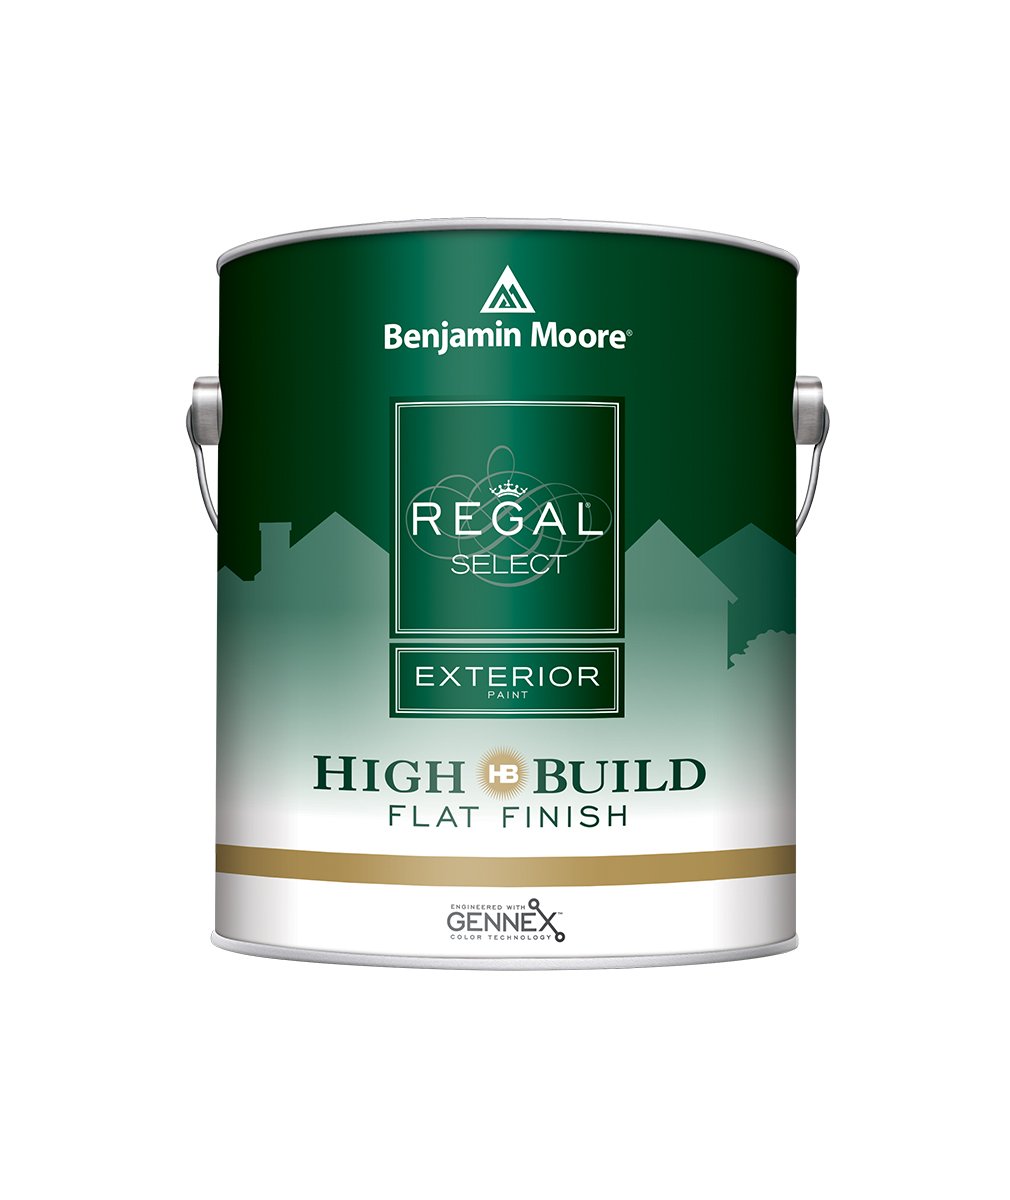 Benjamin Moore Regal Select High Build Flat Exterior Paint Gallon, available at JC Licht.